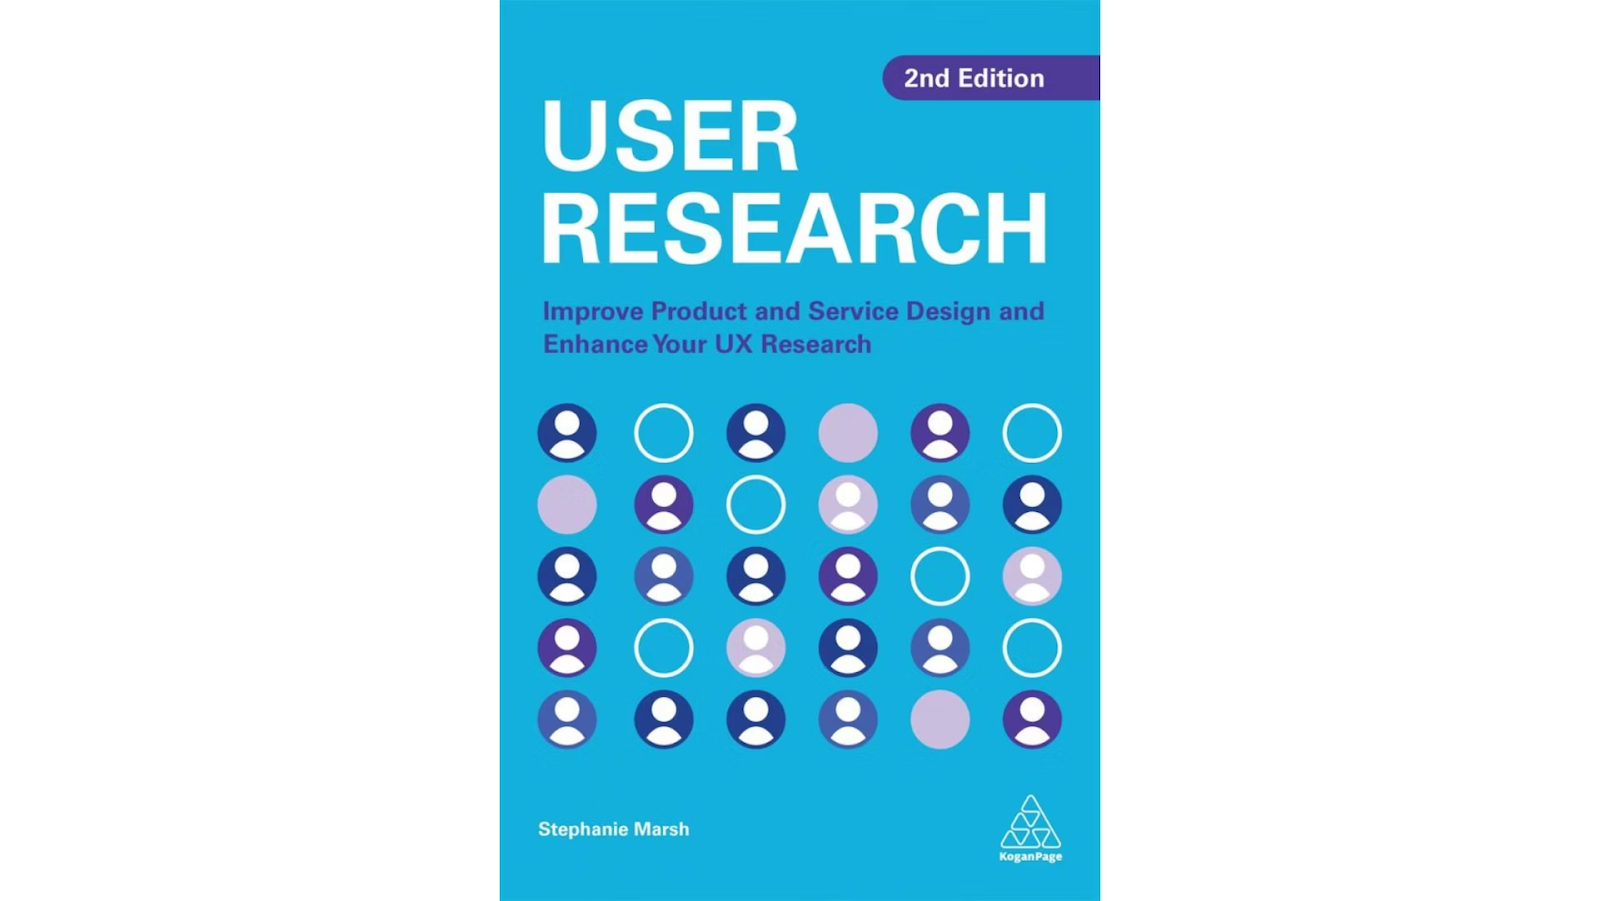 1st UX Research book: User Research by Stephanie Marsh